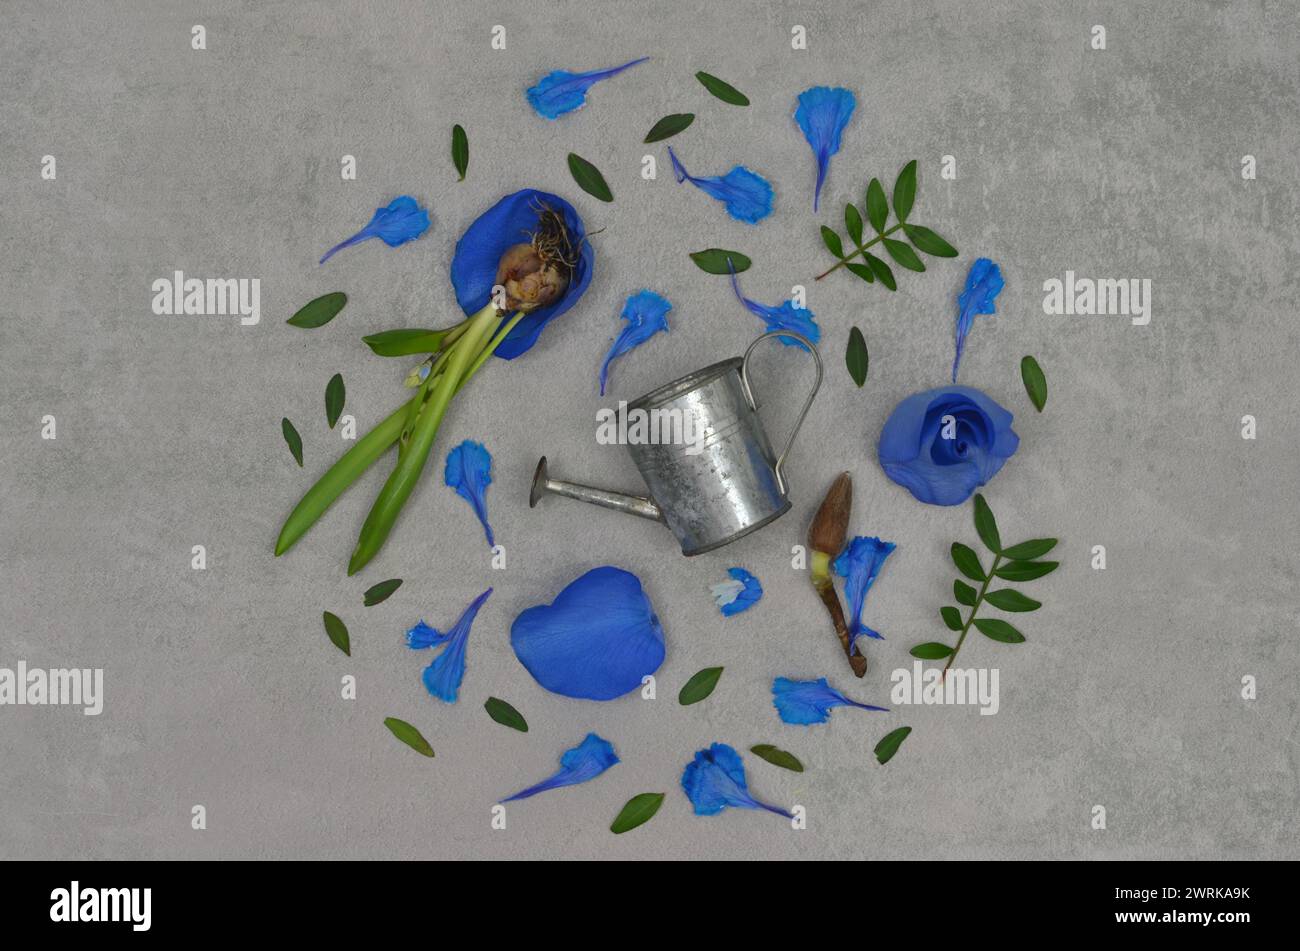 Little tin watering can among blue flowers and leaves, arranged in a circle, top view. Stock Photo